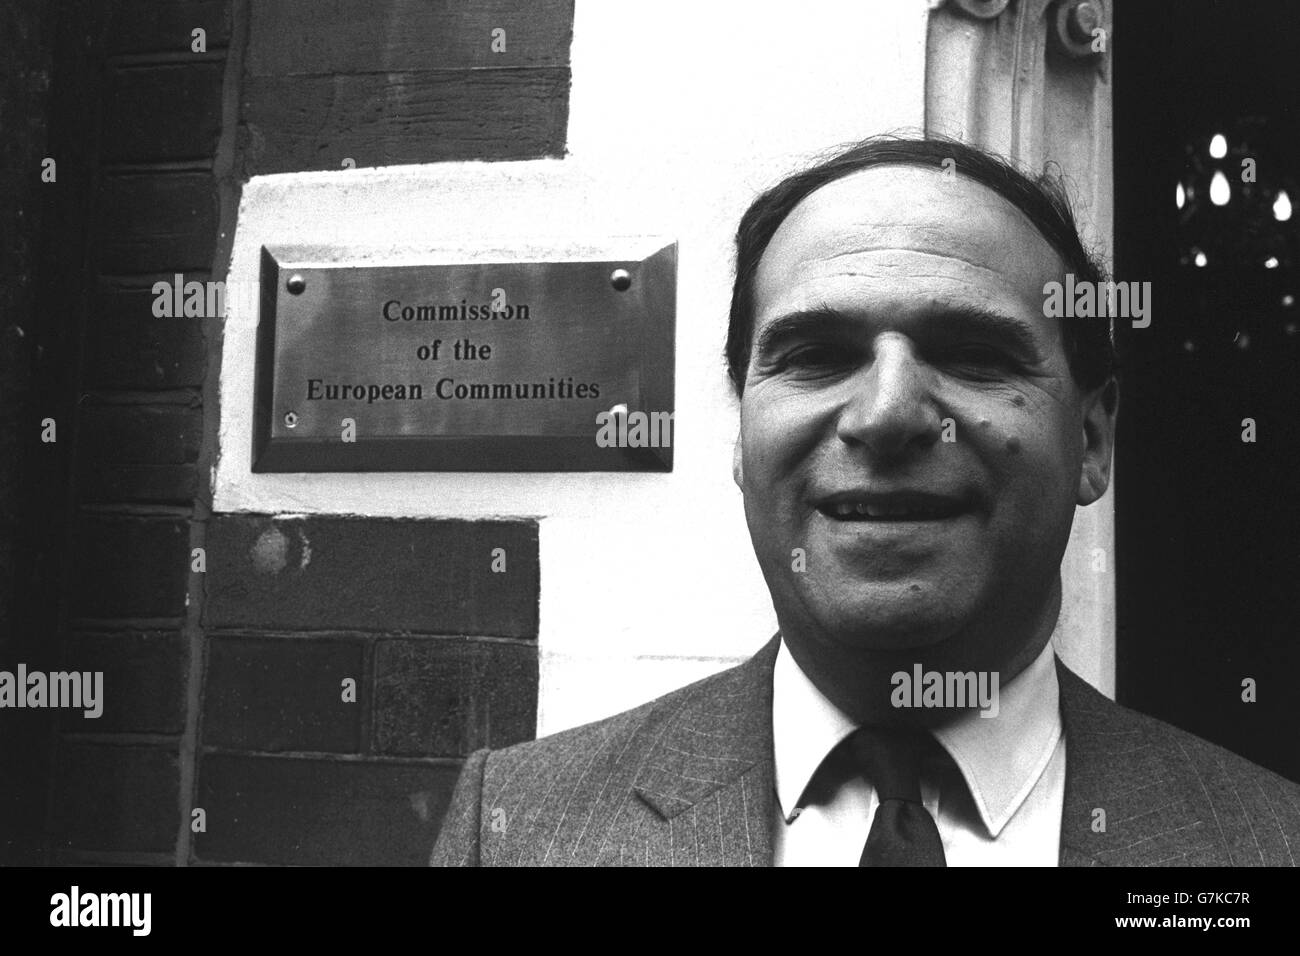 Leon Brittan, who is to become one of Britain's European Commissioners, paying a courtesy visit to the Commission's London office to meet the staff. Stock Photo